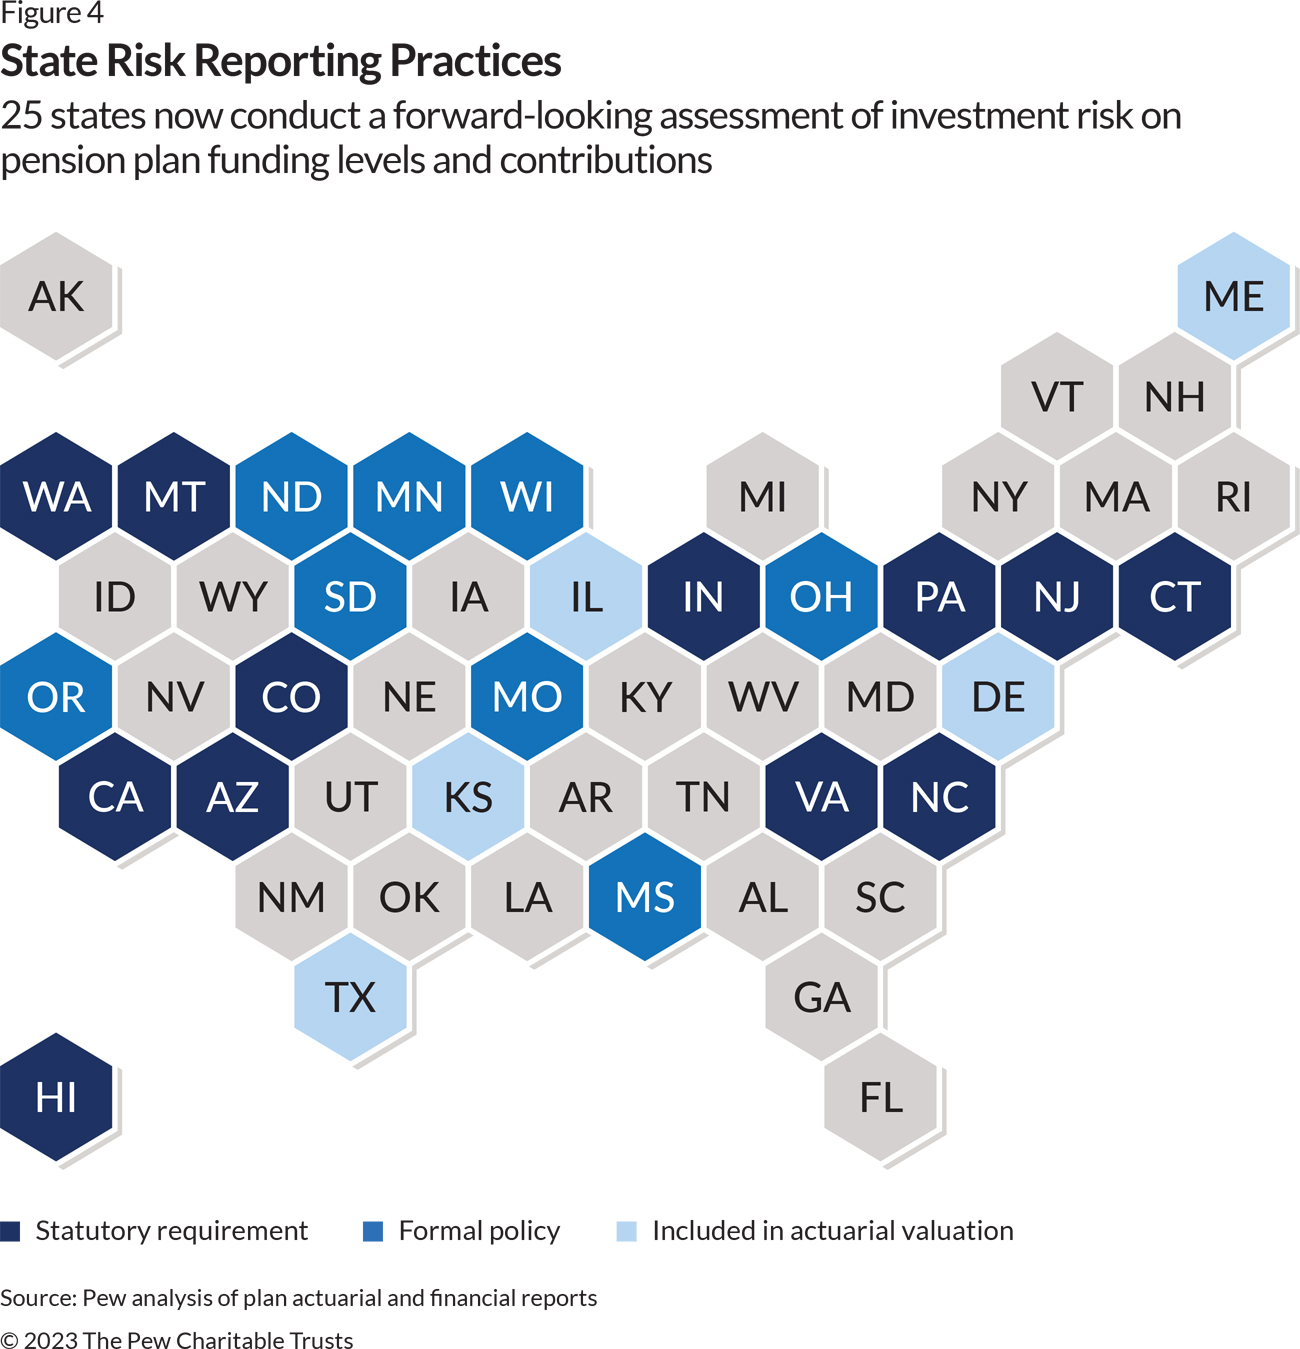 A 50-state map showing that 12 states (in dark blue) had statutory requirements for pension risk reporting, eight (in bright blue) had formal policies of pension risk reporting, and five states (in light blue) had conducted risk reporting without any formal policy requiring it.